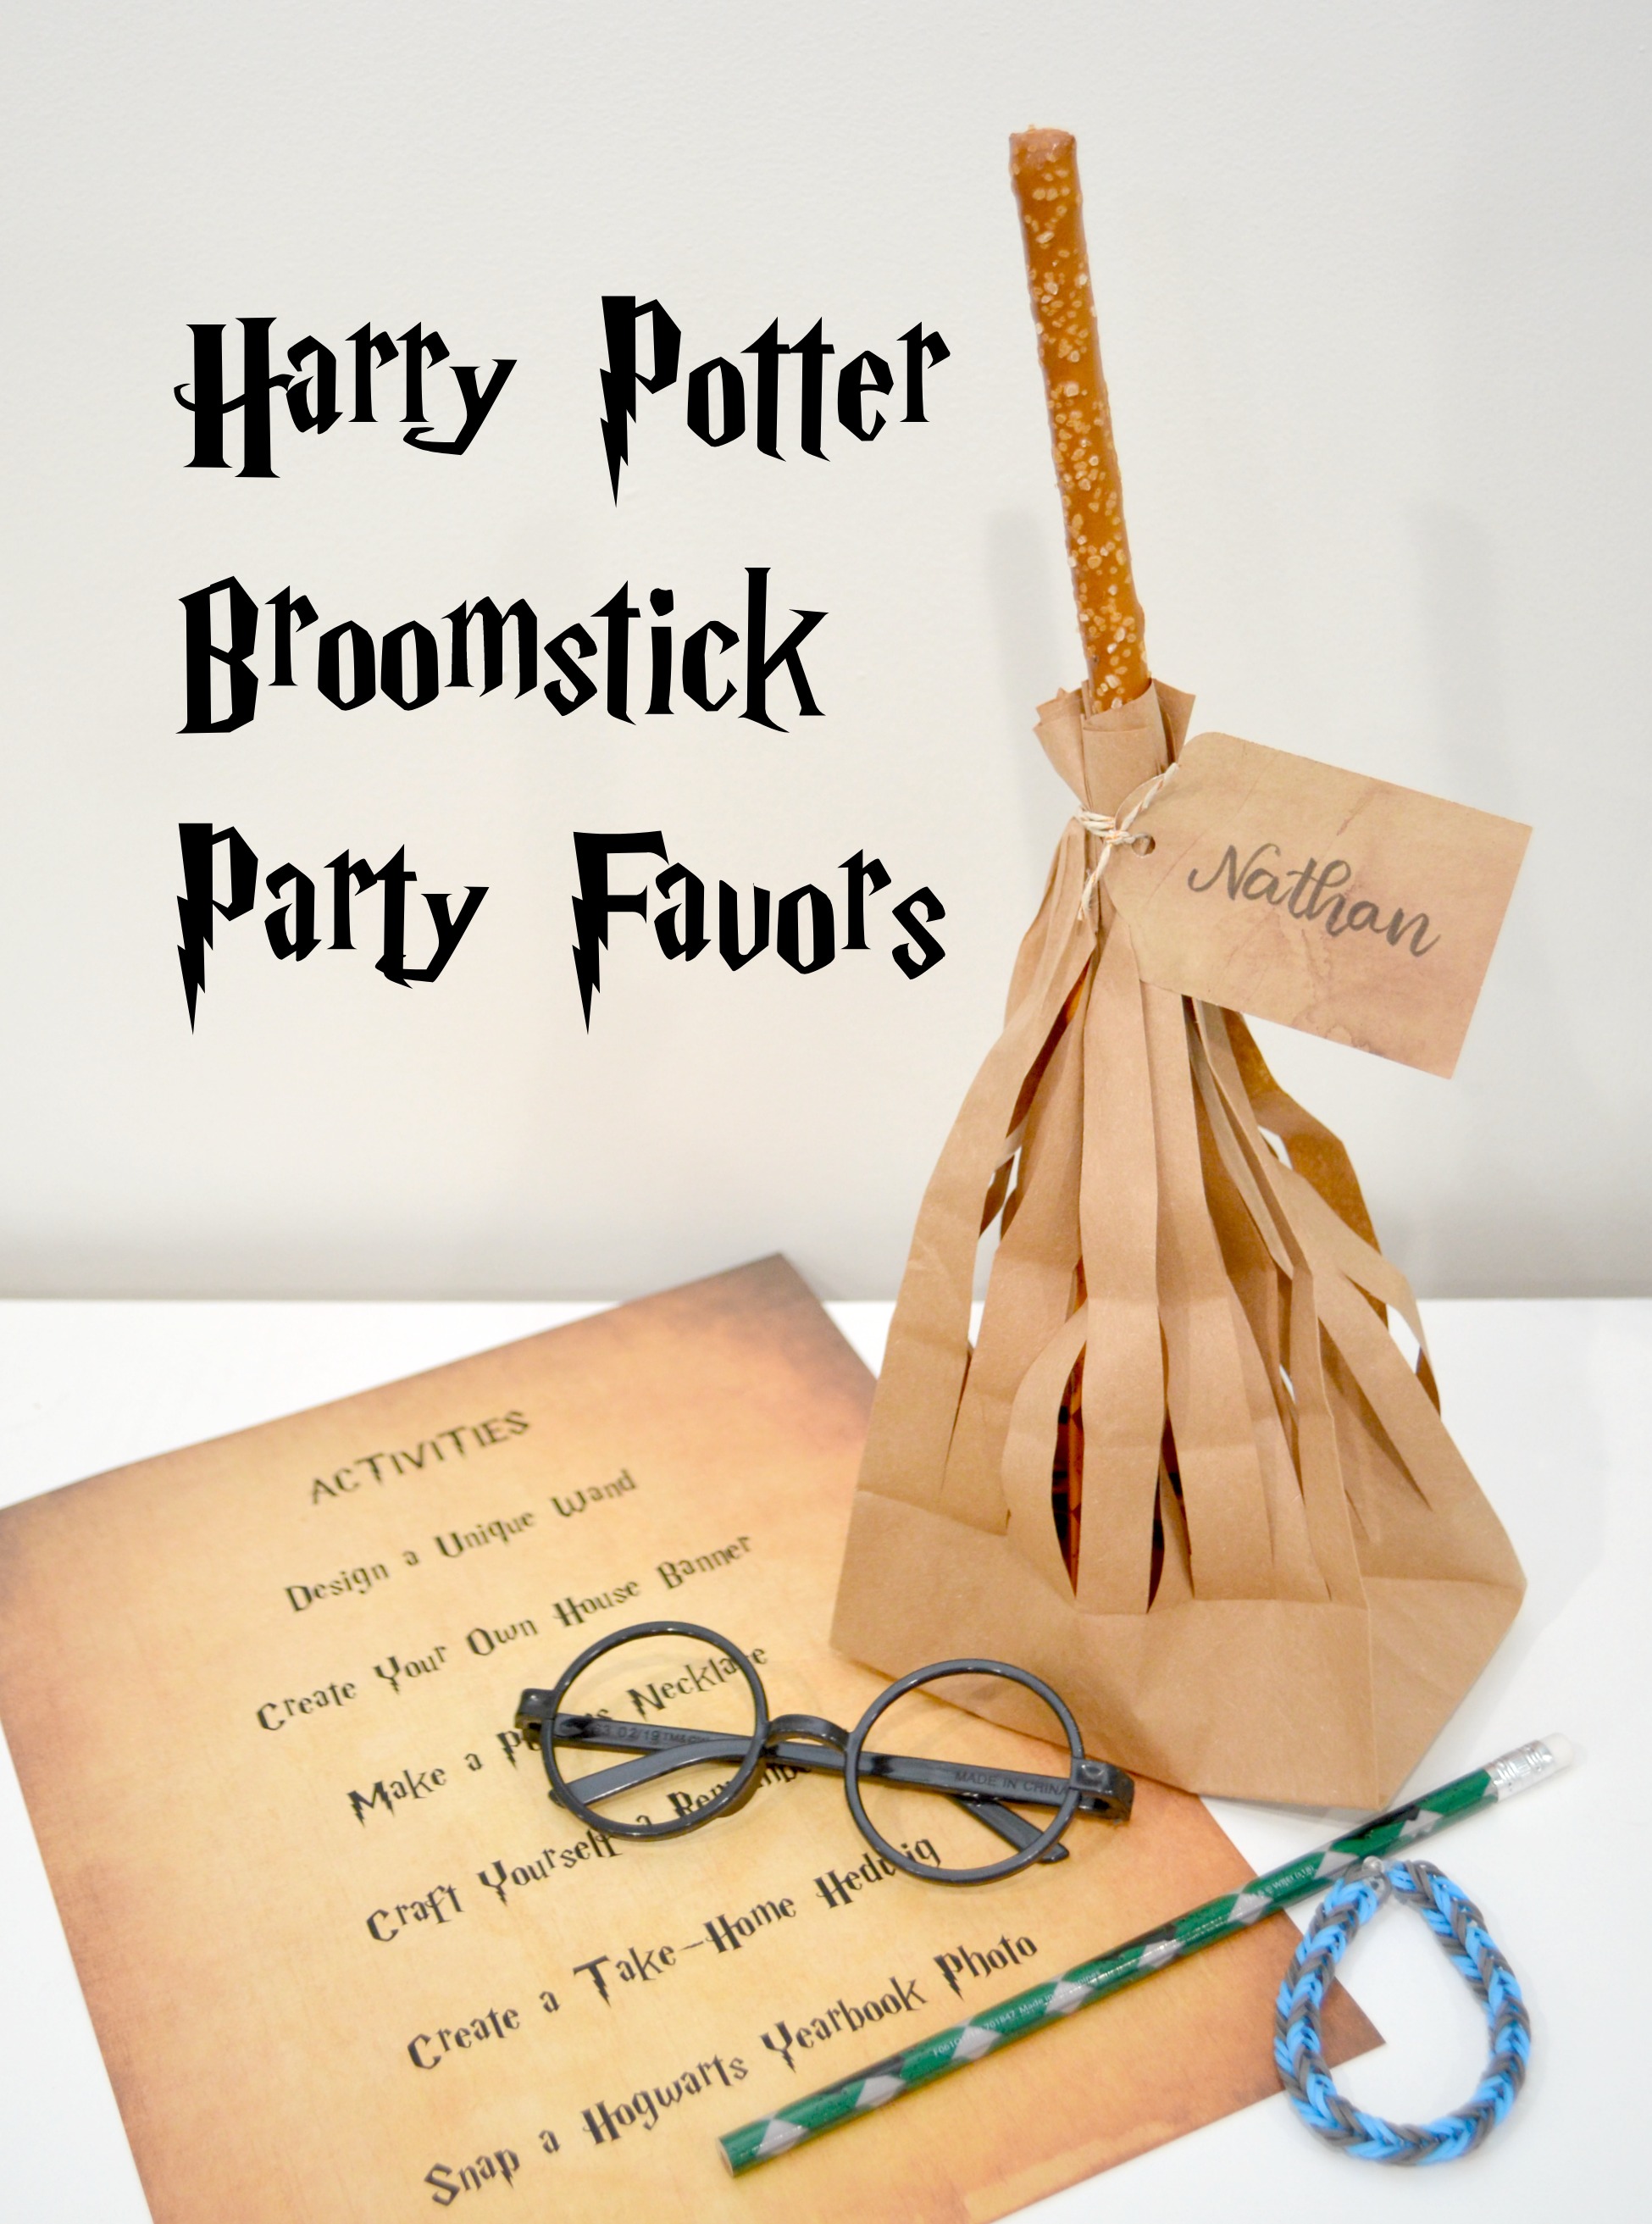 Harry Potter Broomstick Party Favors